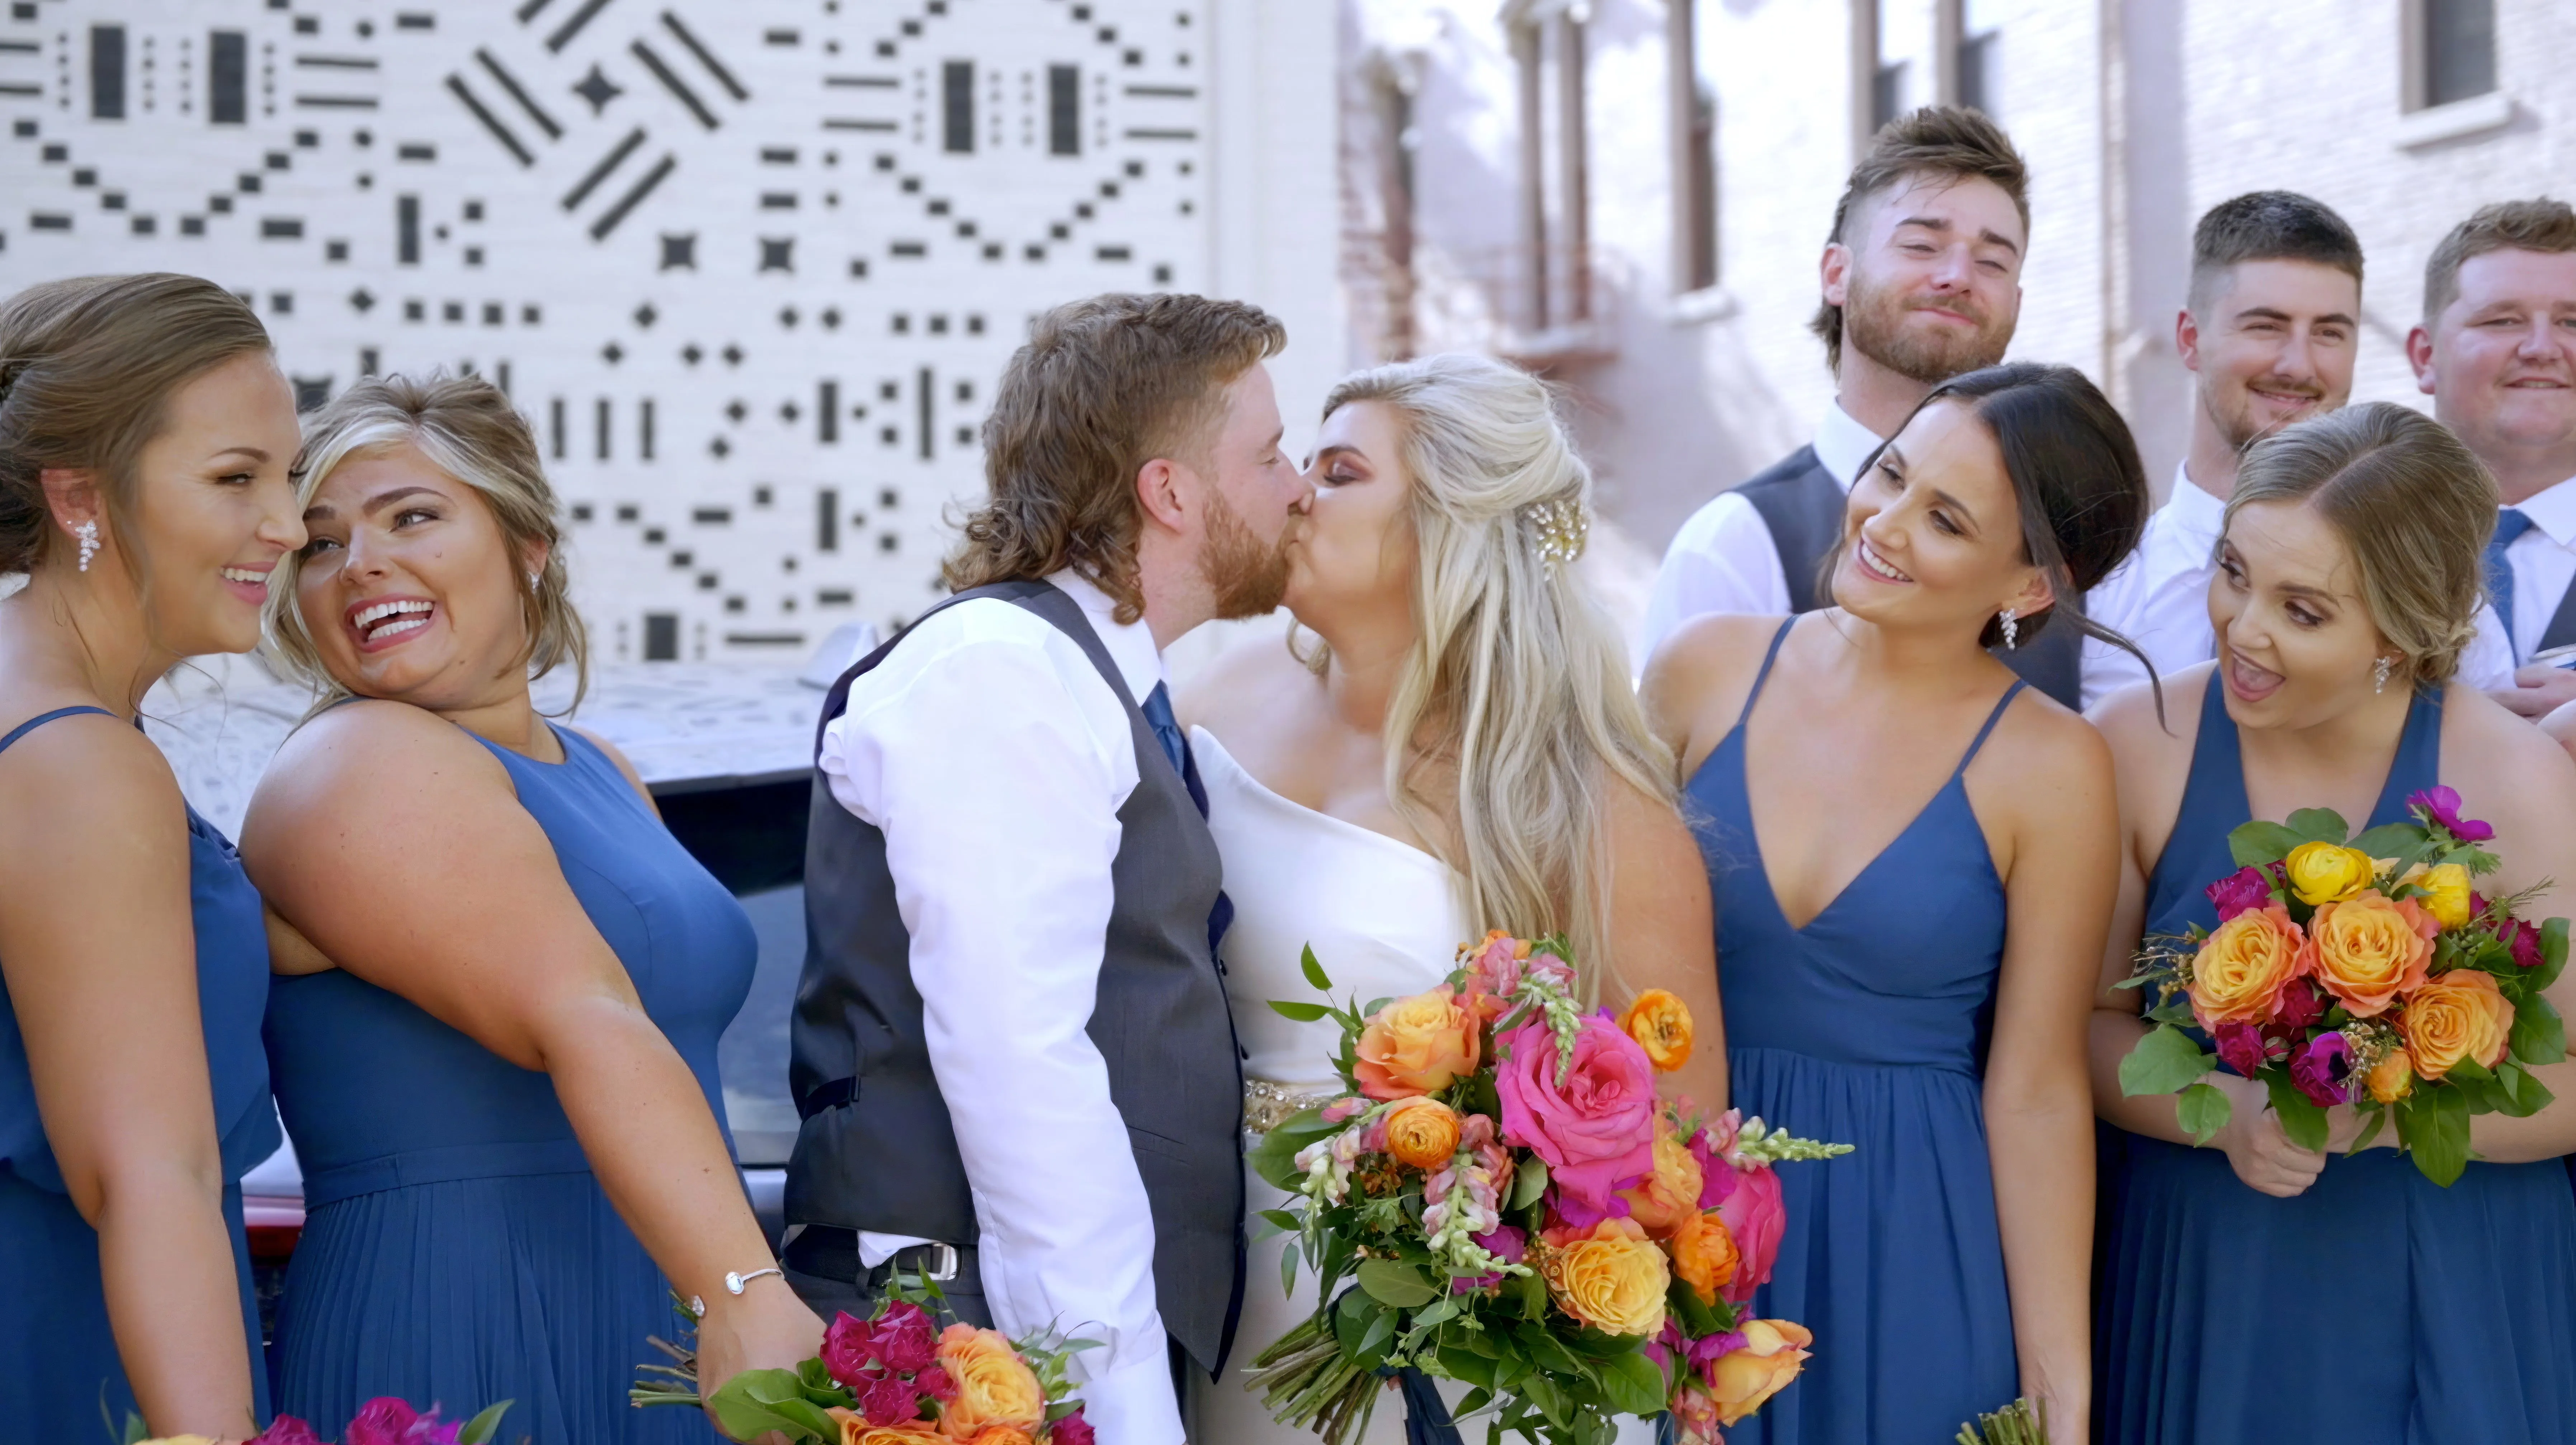 Wedding party with a couple kissing and bridesmaids in blue dresses and groomsmen smiling in the background.